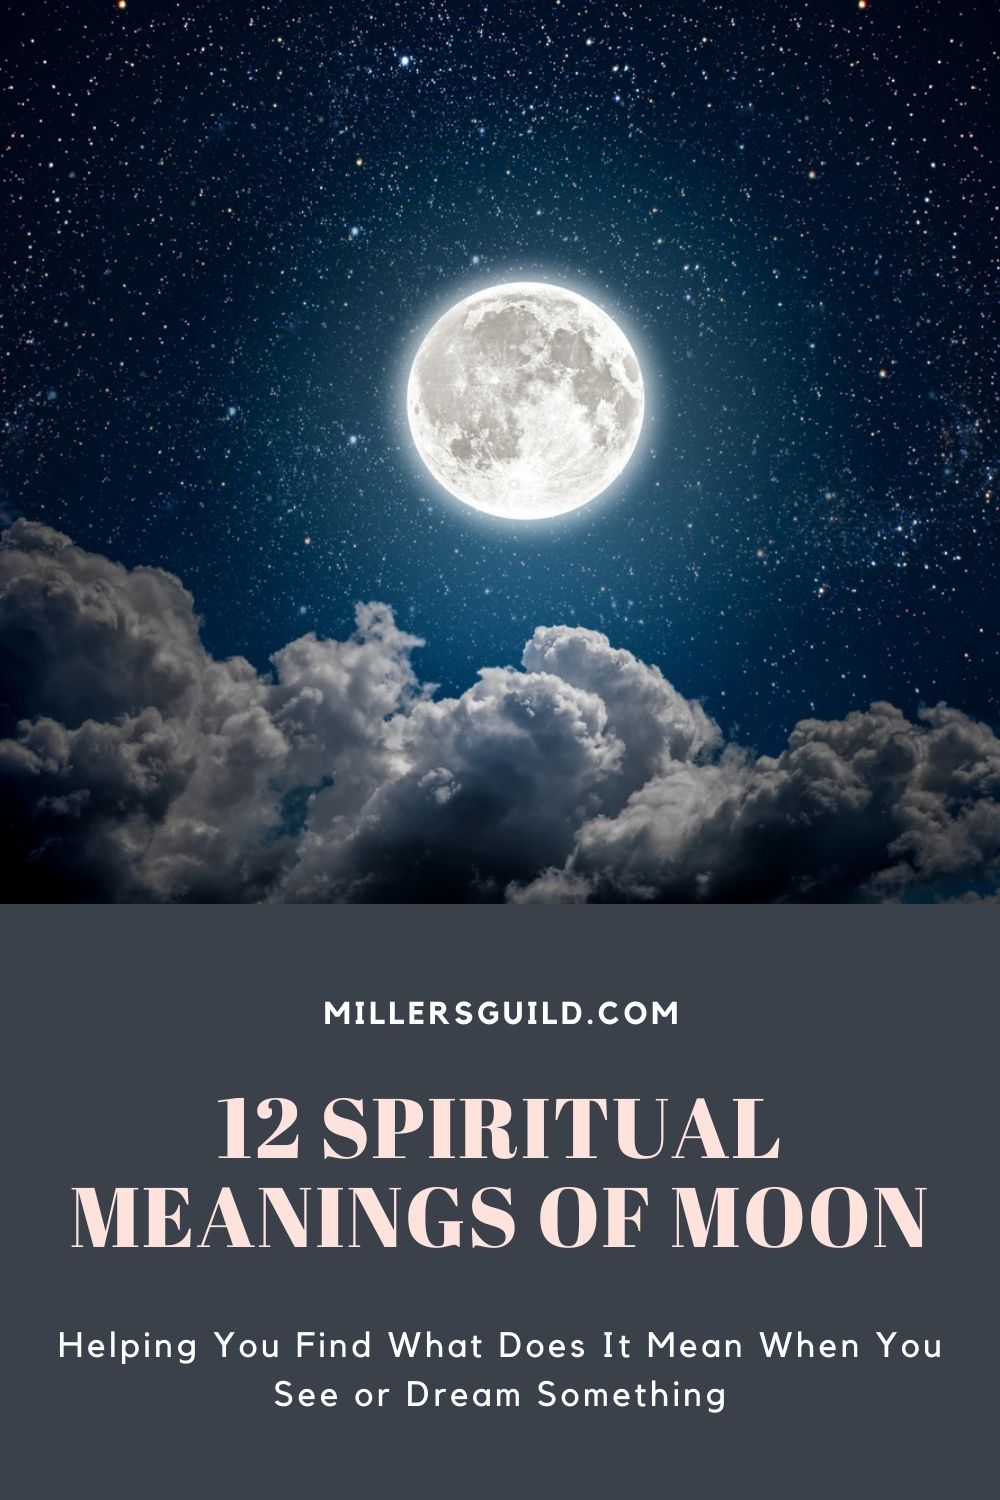 12 Spiritual Meanings of Moon 2